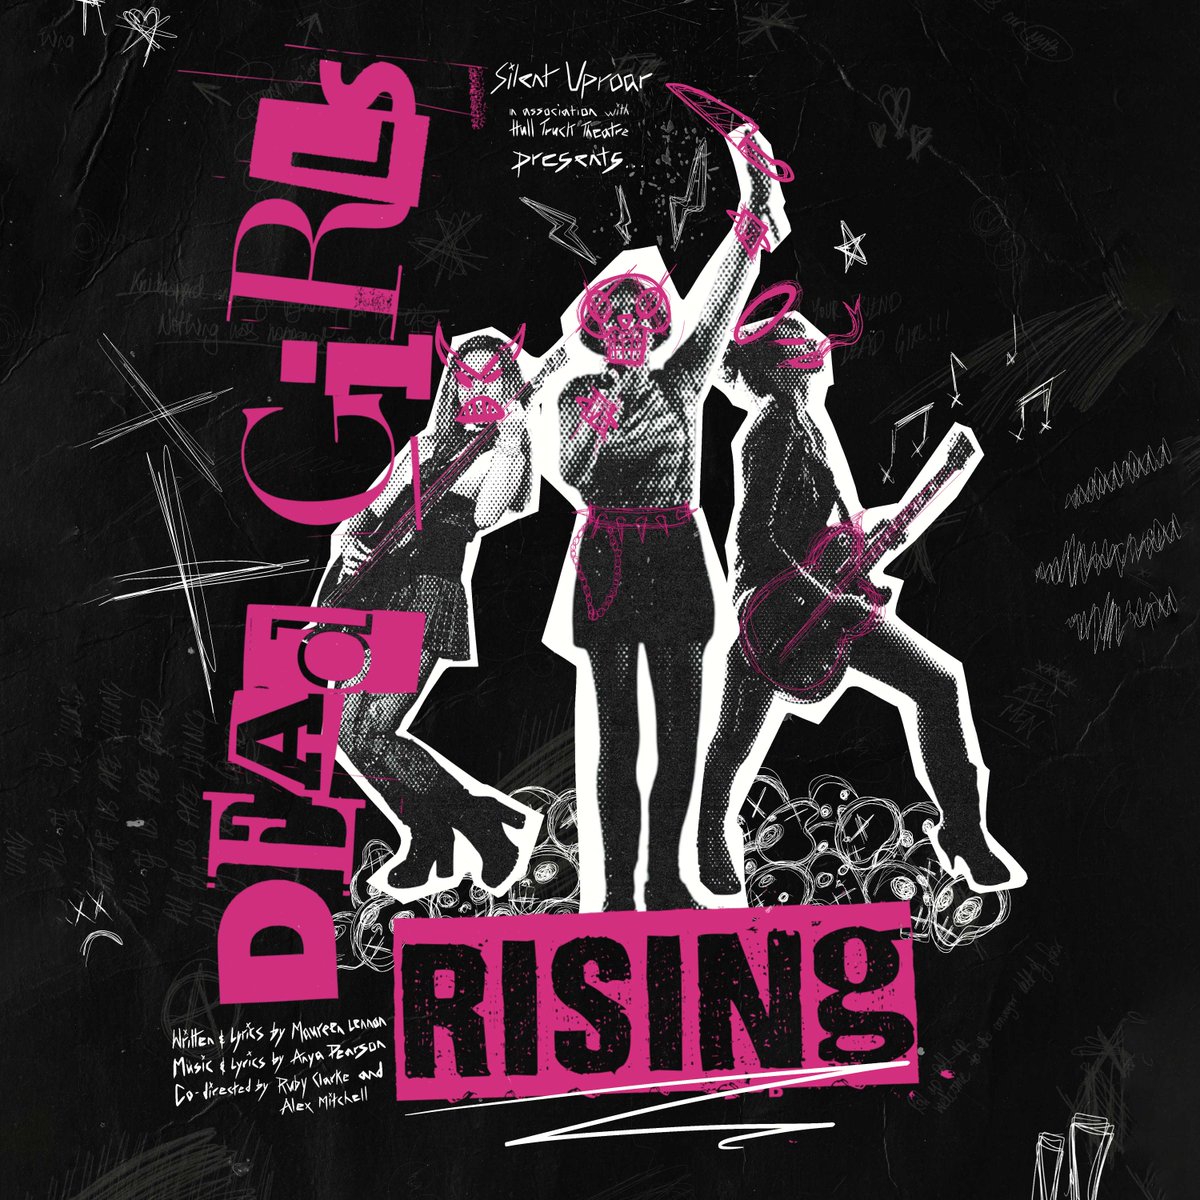 We're looking forward to Dead Girls Rising next month, a furious coming-of-age punk cabaret show about surviving a violent patriarchy. 🎸 😈 Written and lyrics by Maureen Lennon, with music and lyrics by Anya Pearson.